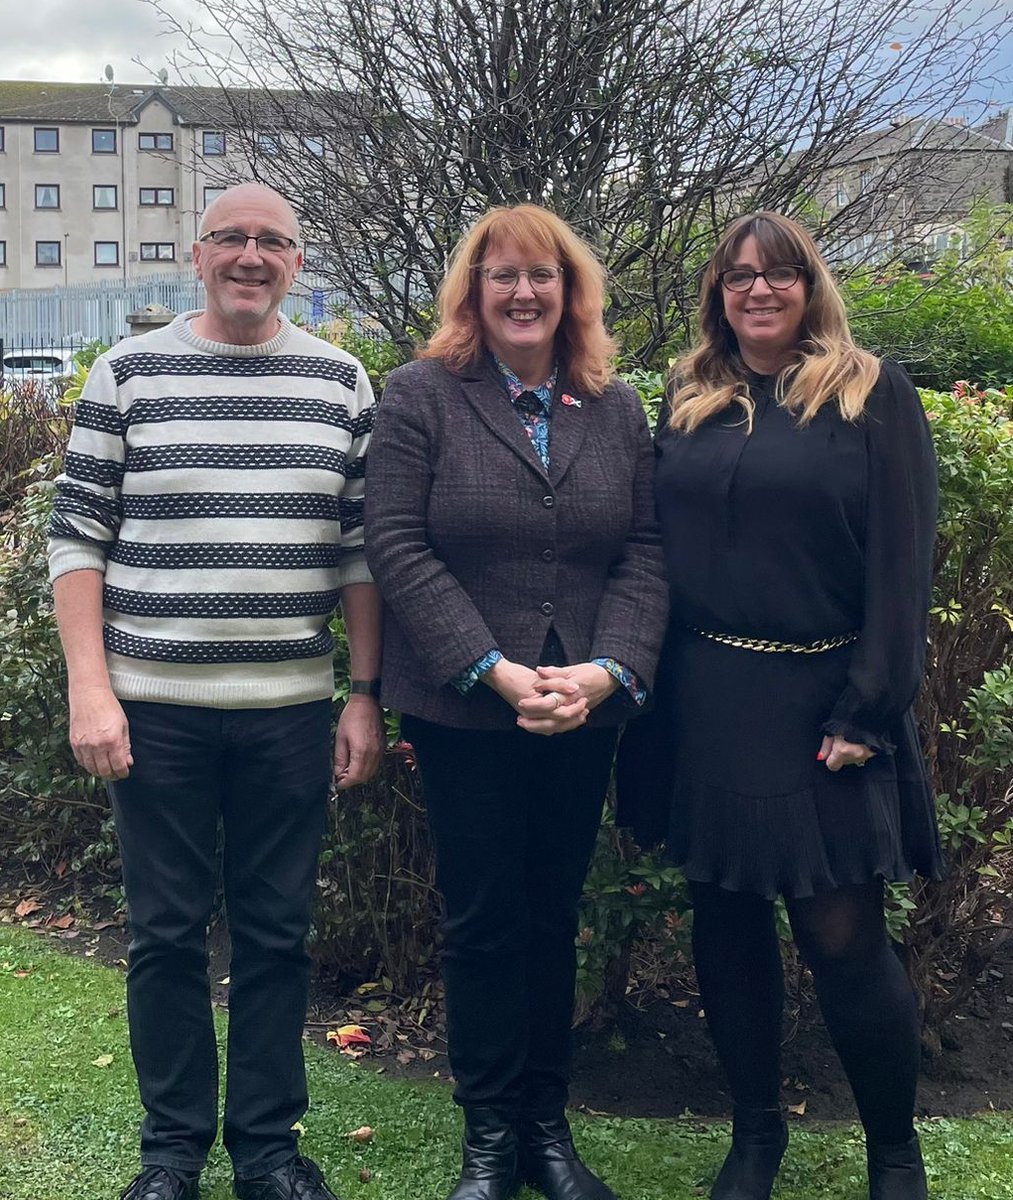 It was a pleasure to get a recent visit from @DeidreBrock at our Thorntree Street Homes for Life. Our team were able to give her an insight into the amazing work they do there and she had the opportunity to meet a few of the tenants. Nice to see you Deidre!